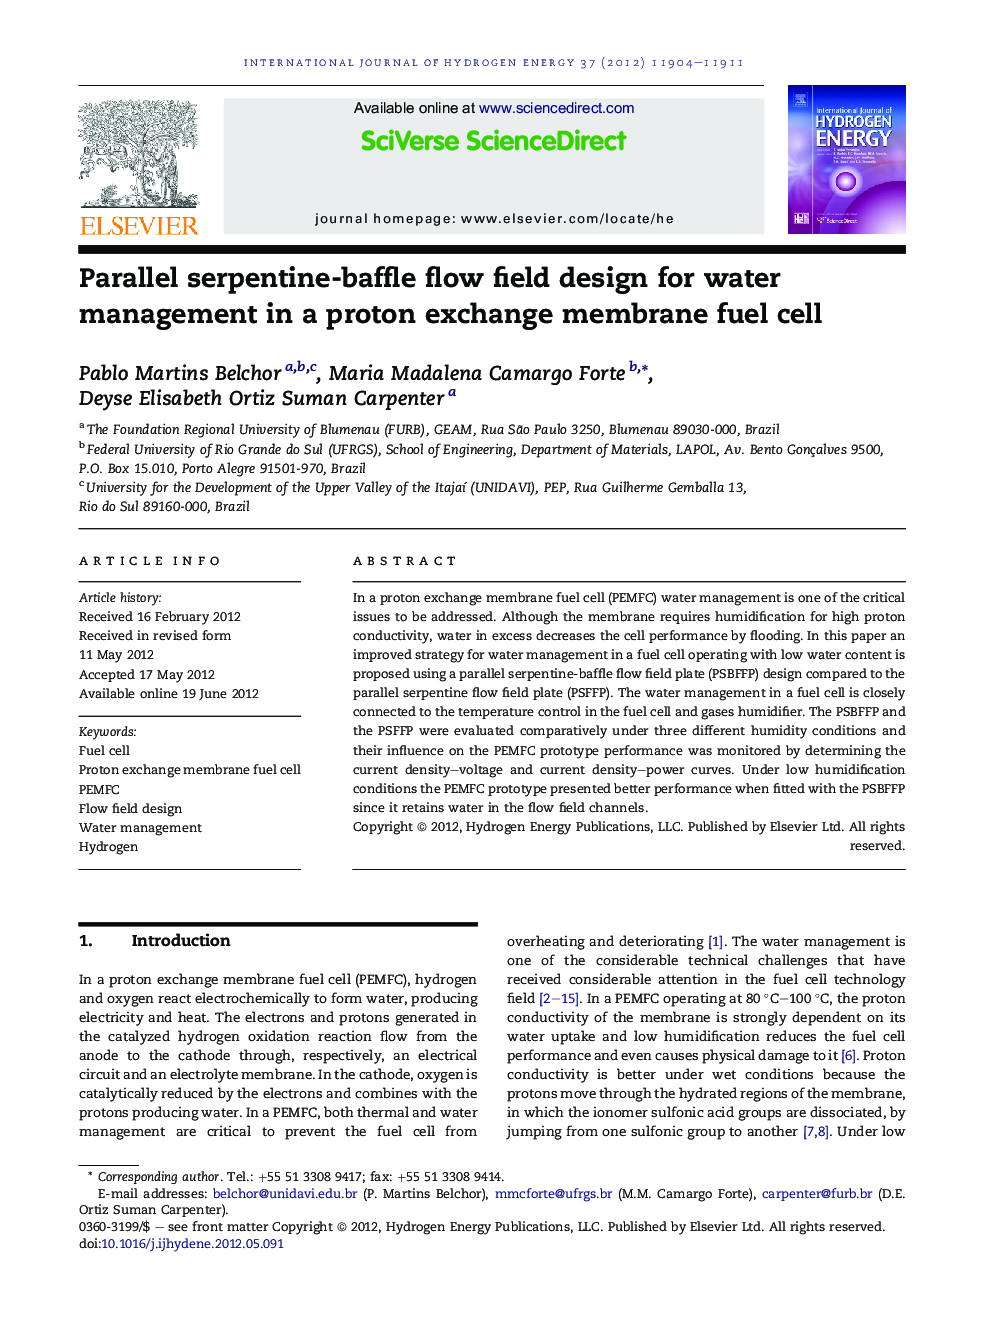 Parallel serpentine-baffle flow field design for water management in a proton exchange membrane fuel cell